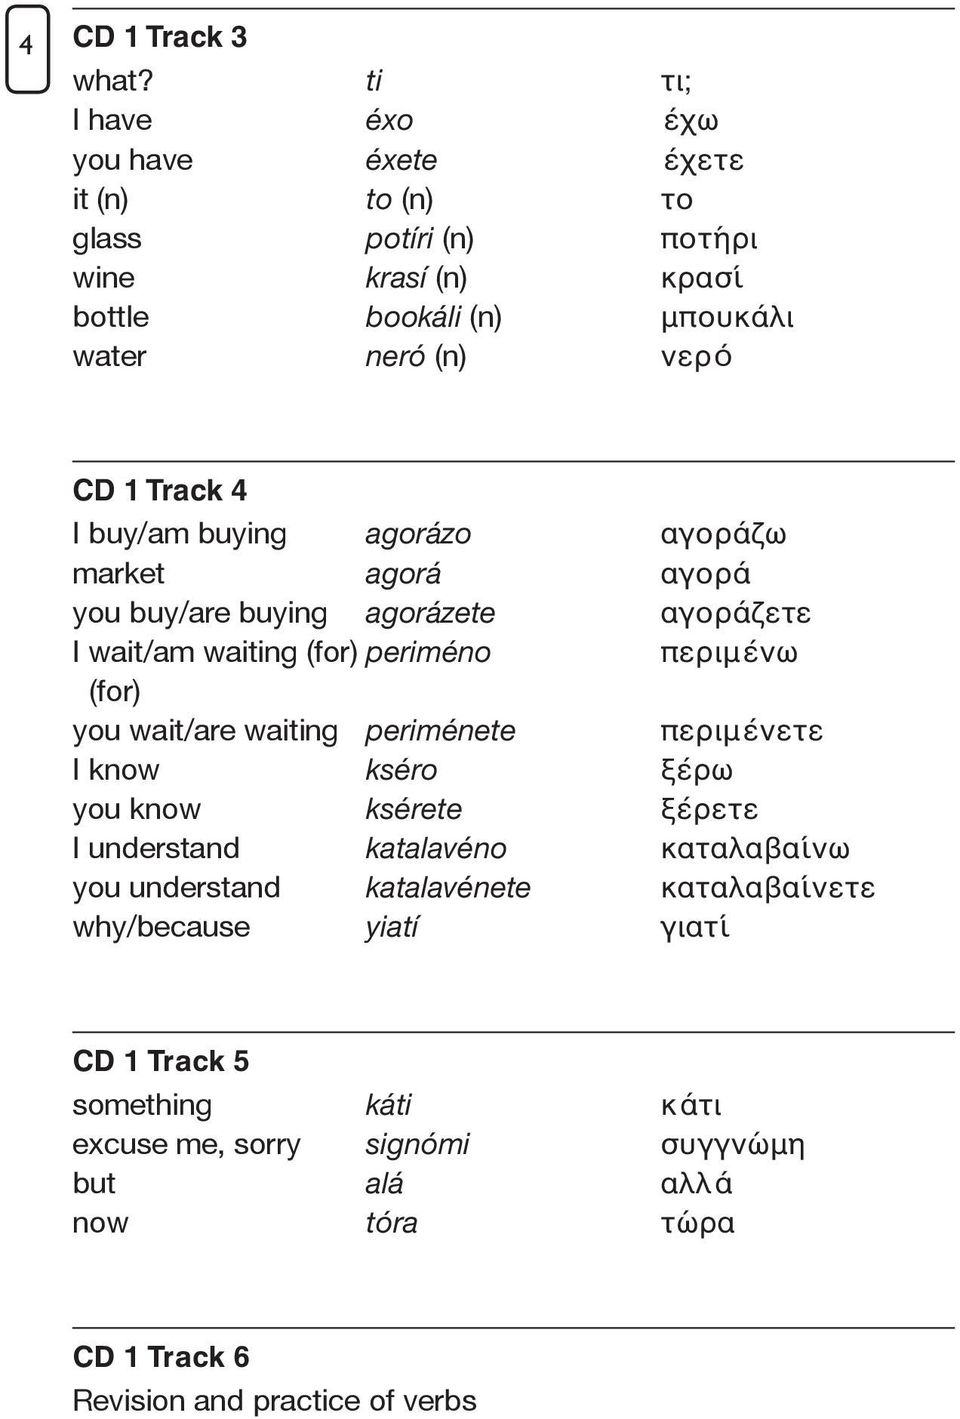 Track 4 I buy/am buying agorázo αγορ άζω market agorá αγορ ά you buy/are buying agorázete αγορ άζετε I wait/am waiting (for) periméno περιμ ένω (for) you wait/are